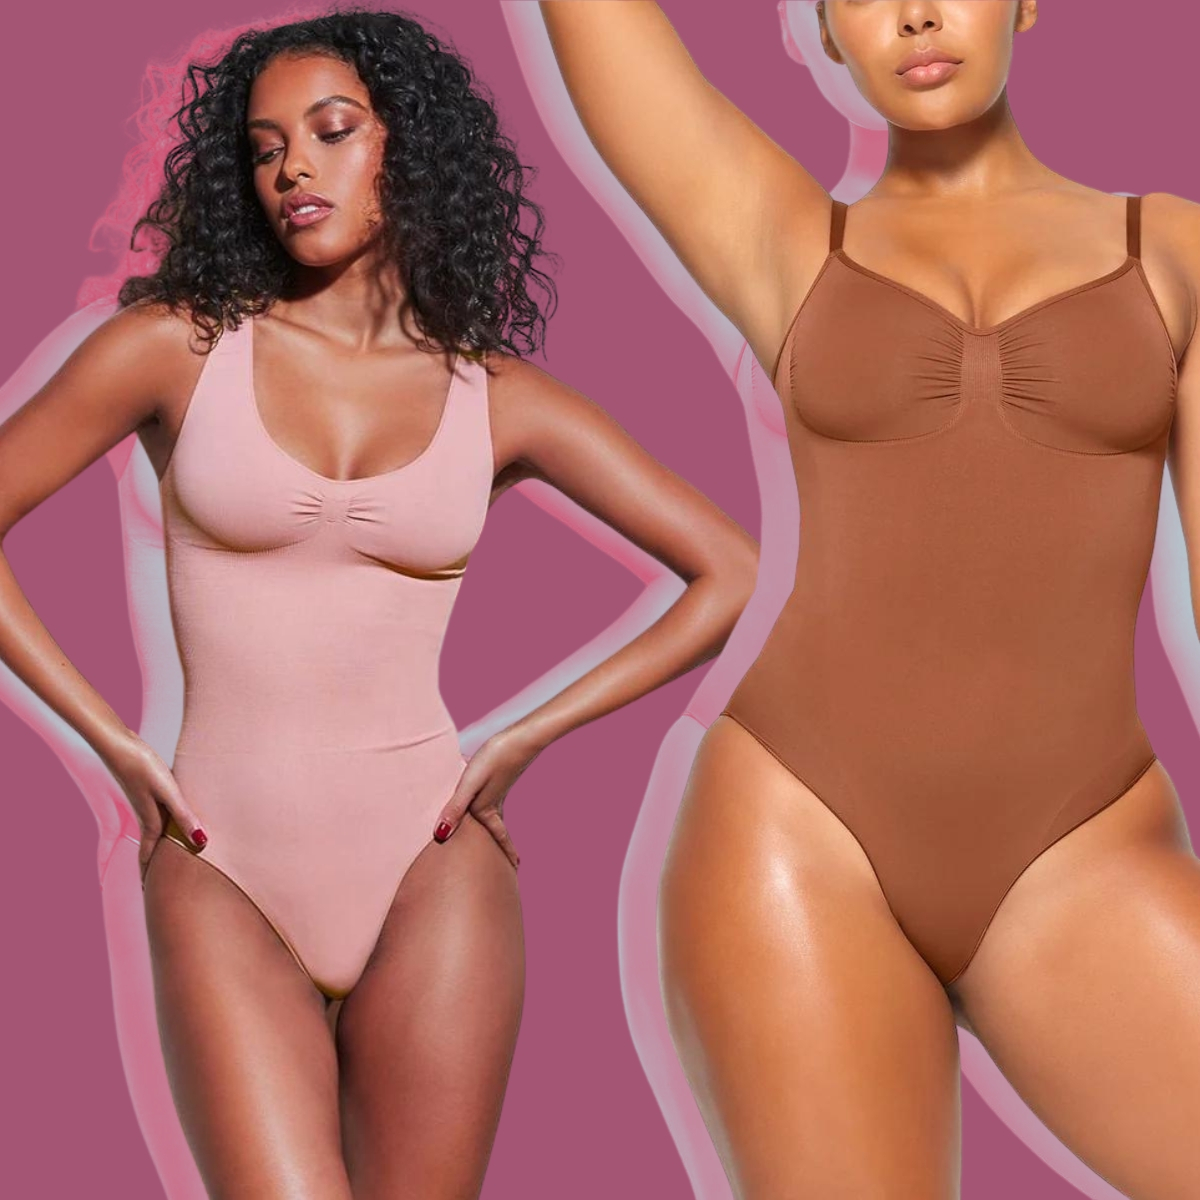 Never Have Your Shapewear Roll Down Again With These Tips